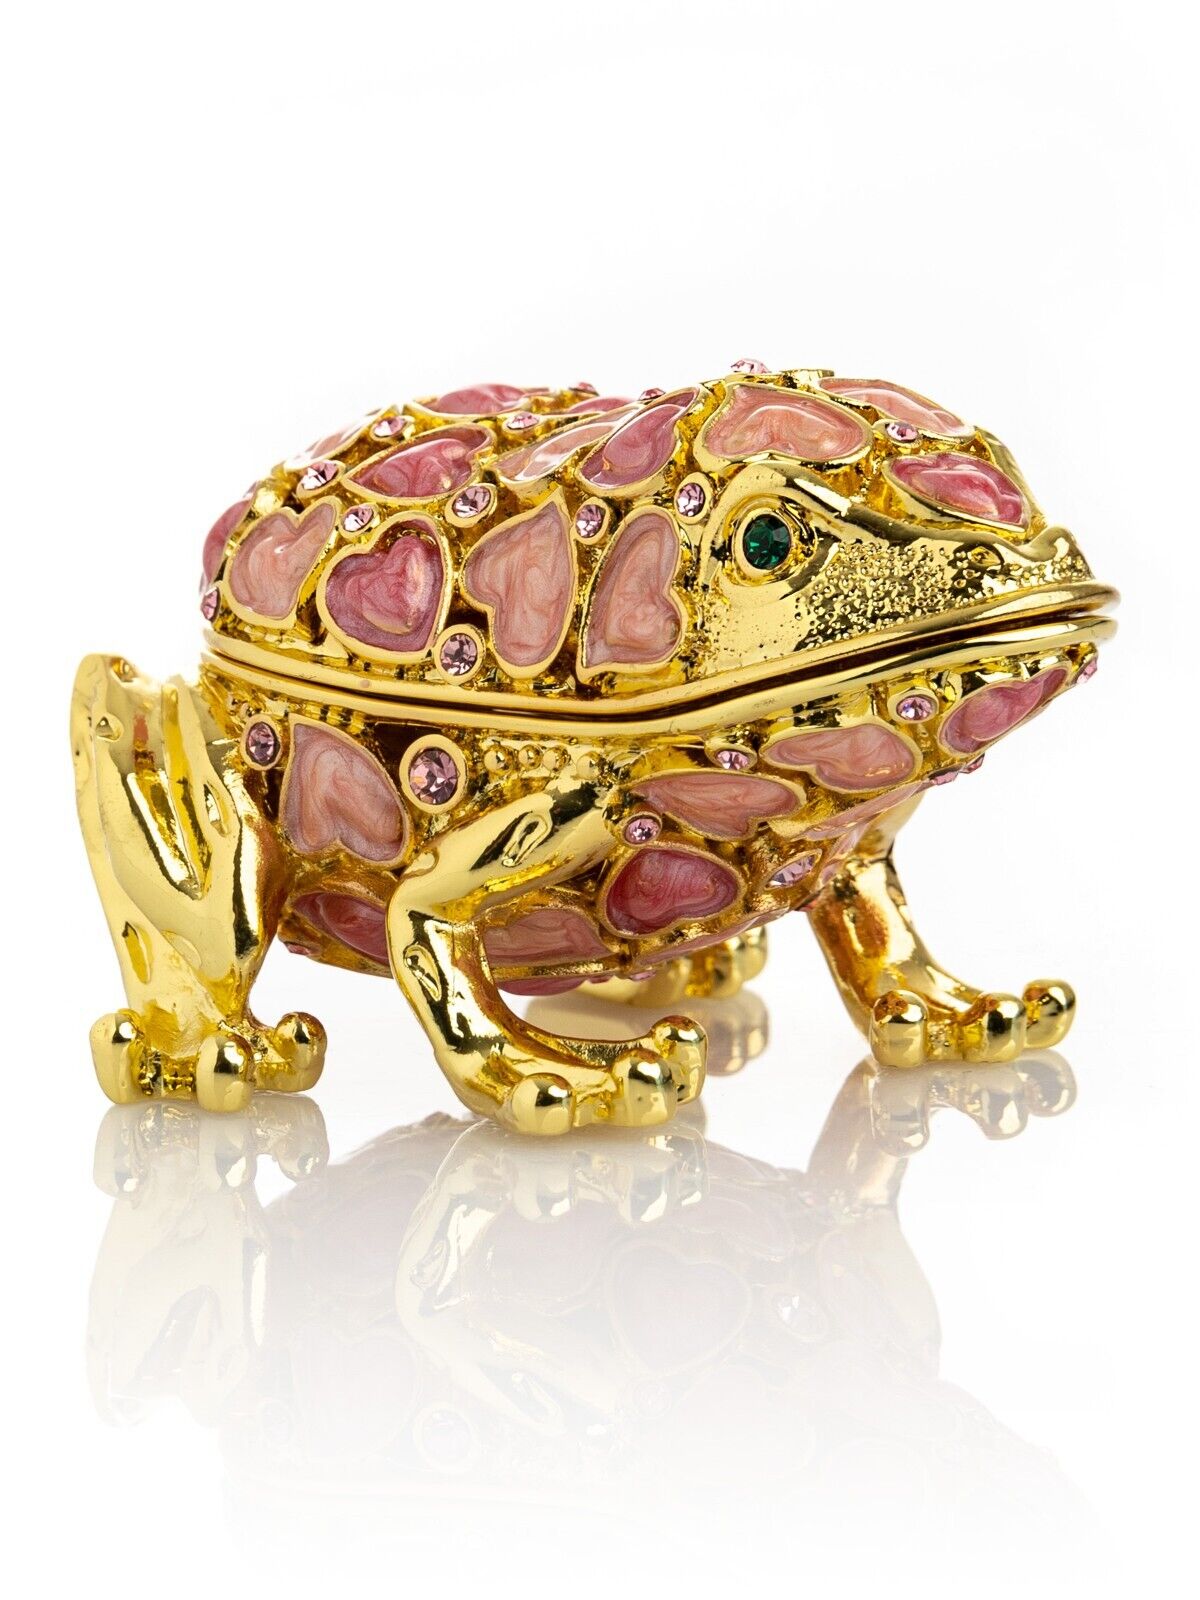 Keren Kopal Frog with Hearts Trinket Box Decorated with Austrian Crystals